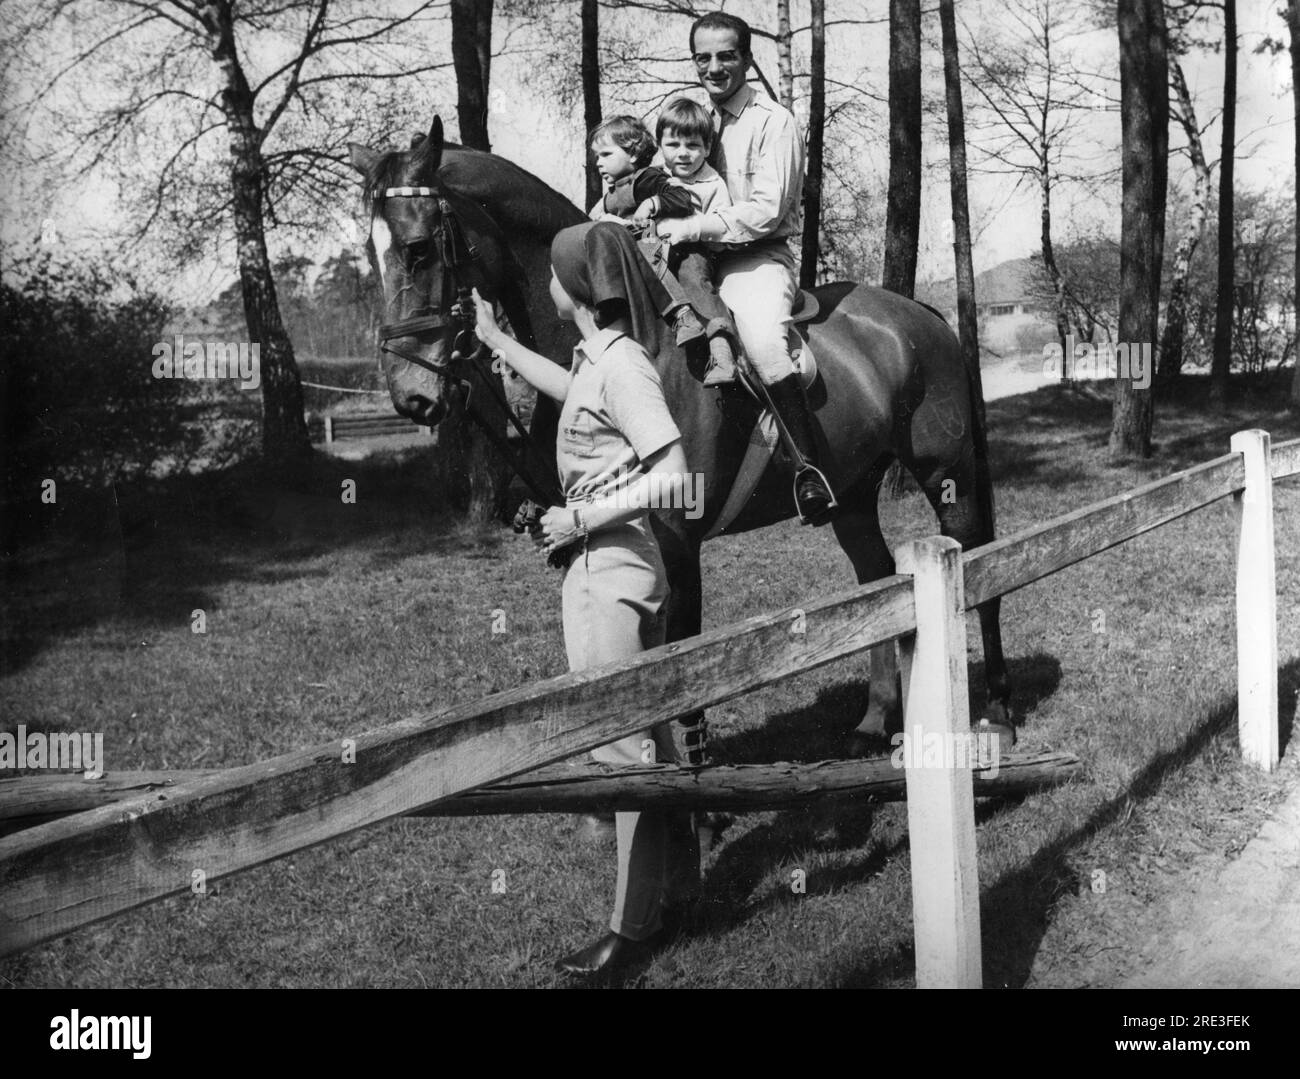 Winkler, Hans Guenter, 24.7.1926 - 9.7.2018, German jump jockey, with his family, wife Marianne, ADDITIONAL-RIGHTS-CLEARANCE-INFO-NOT-AVAILABLE Stock Photo